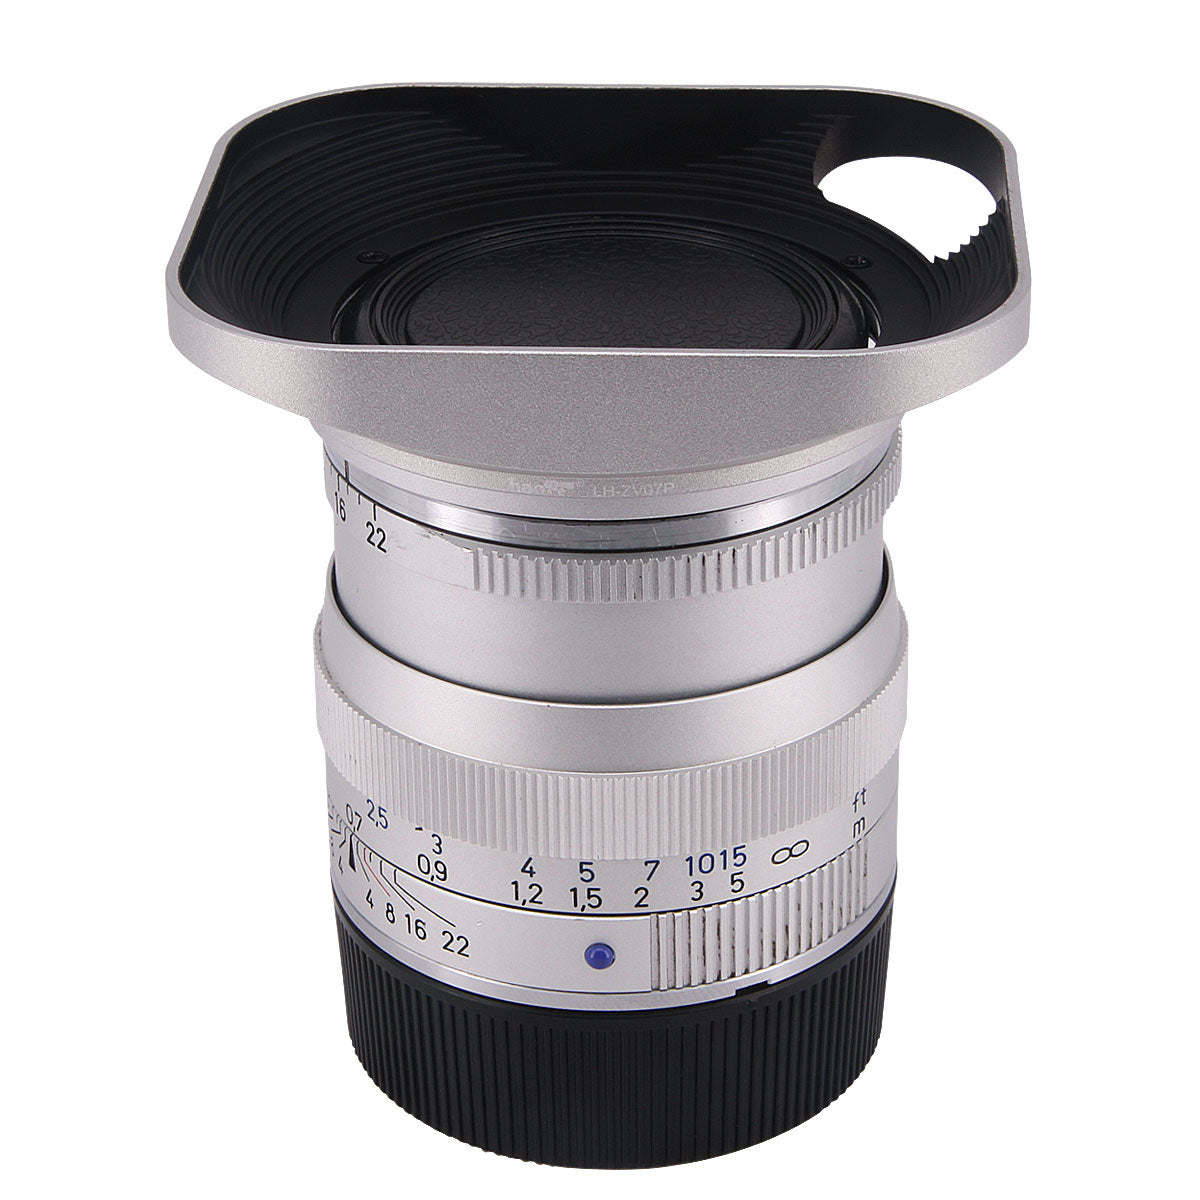 Haoge LH-ZV07P Lens Hood for Carl Zeiss Biogon T 2/35 35mm f2 ZM, C Biogon T 2.8/35 35mm f2.8 ZM, Planar T 2/50 50mm f2 ZM; Voigtlander NOKTON Classic 35mm f1.4 VM, 40mm f1.4 VM Hollow Out Designed